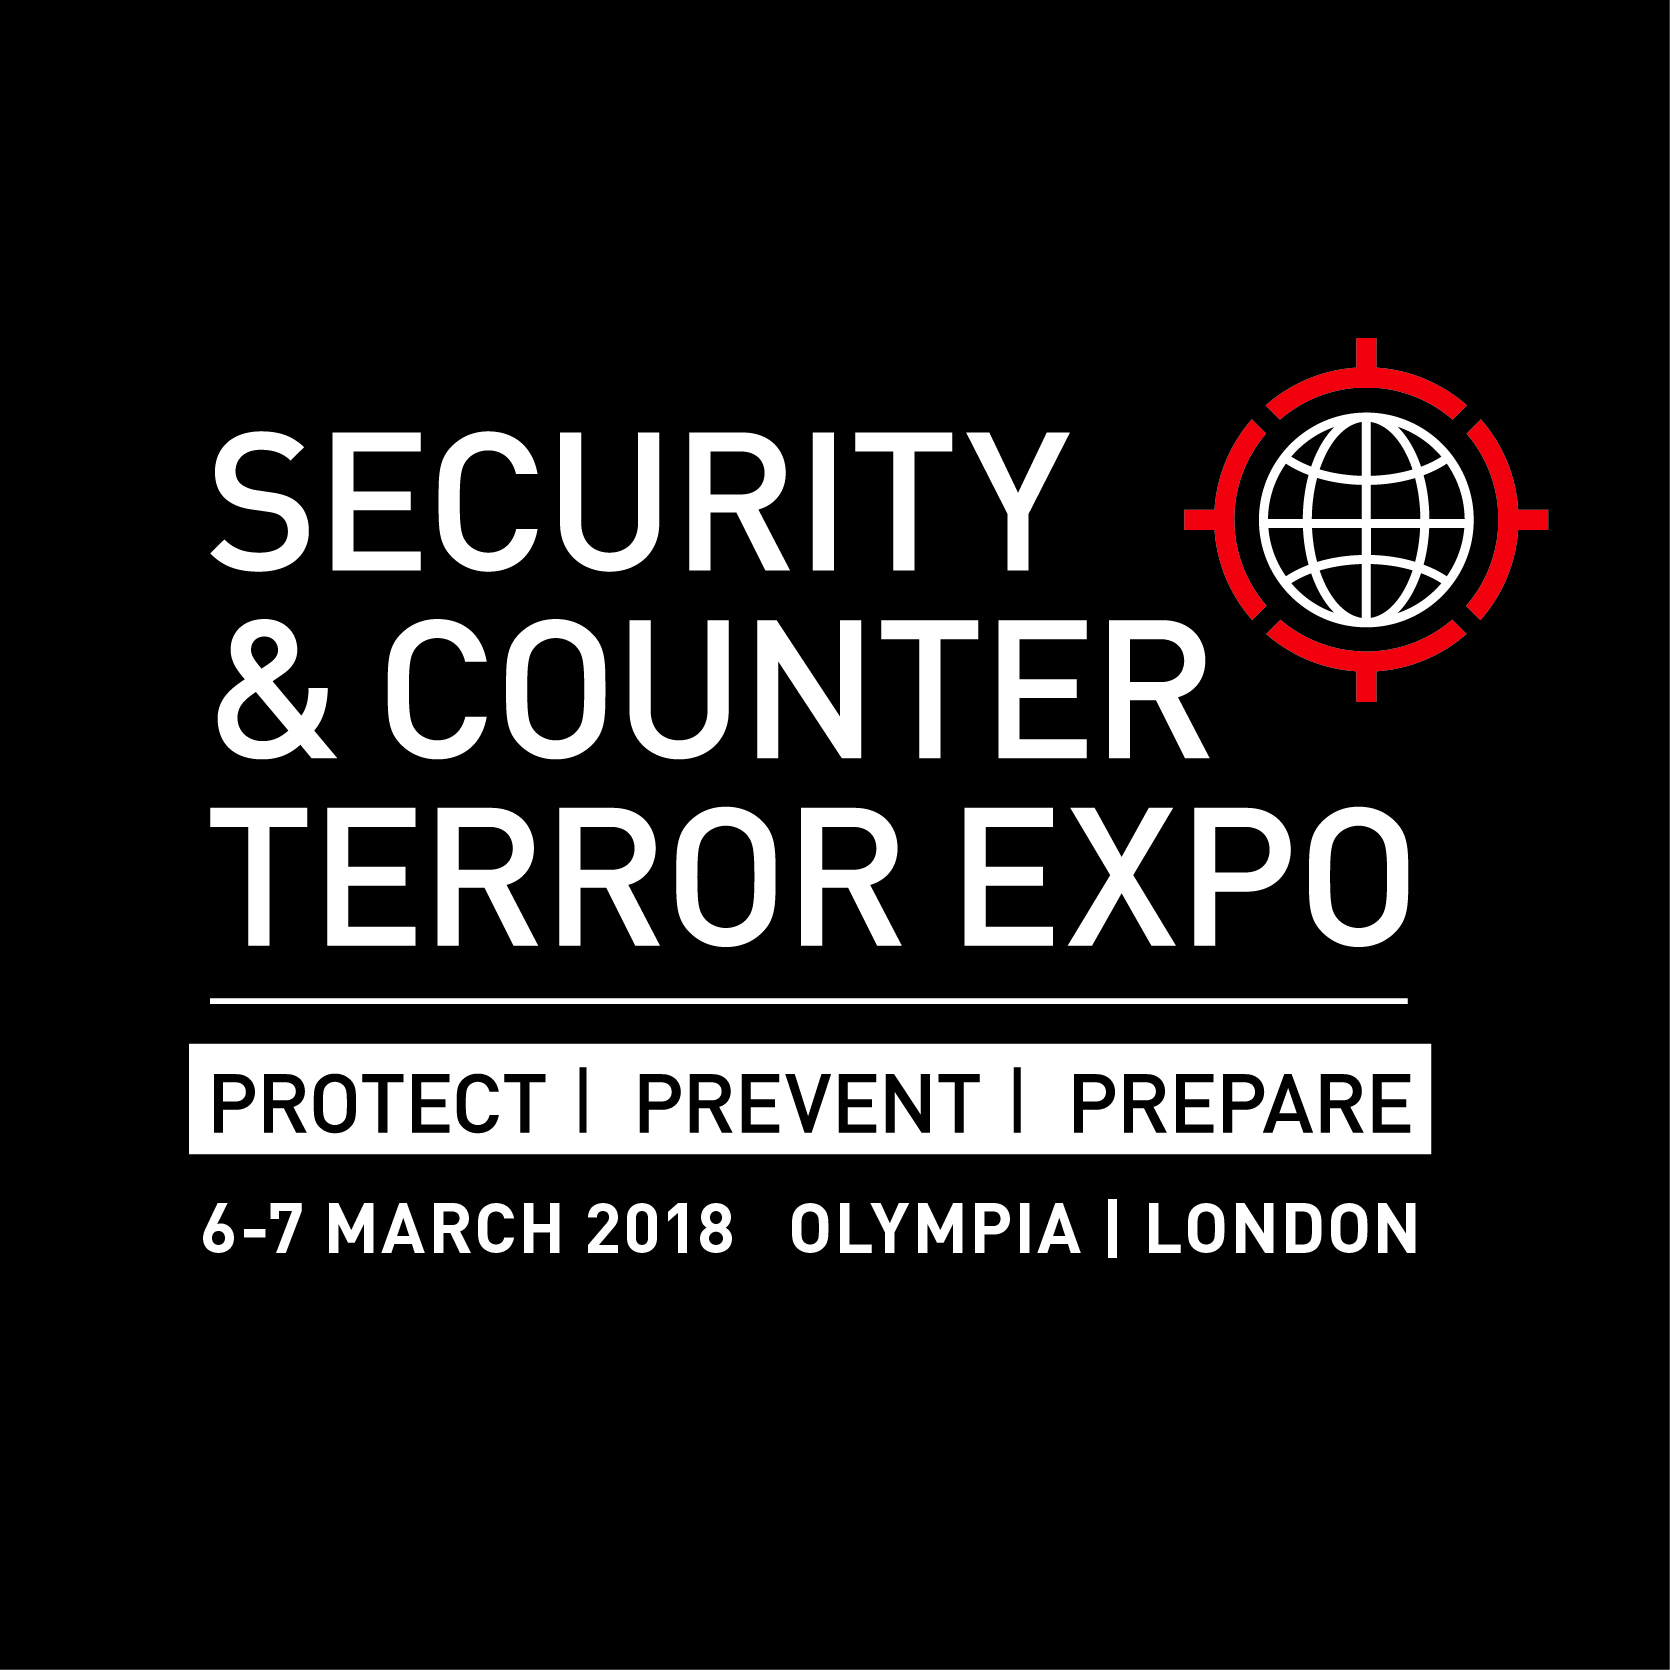 Security experts come together to tackle terrorism at SCTX